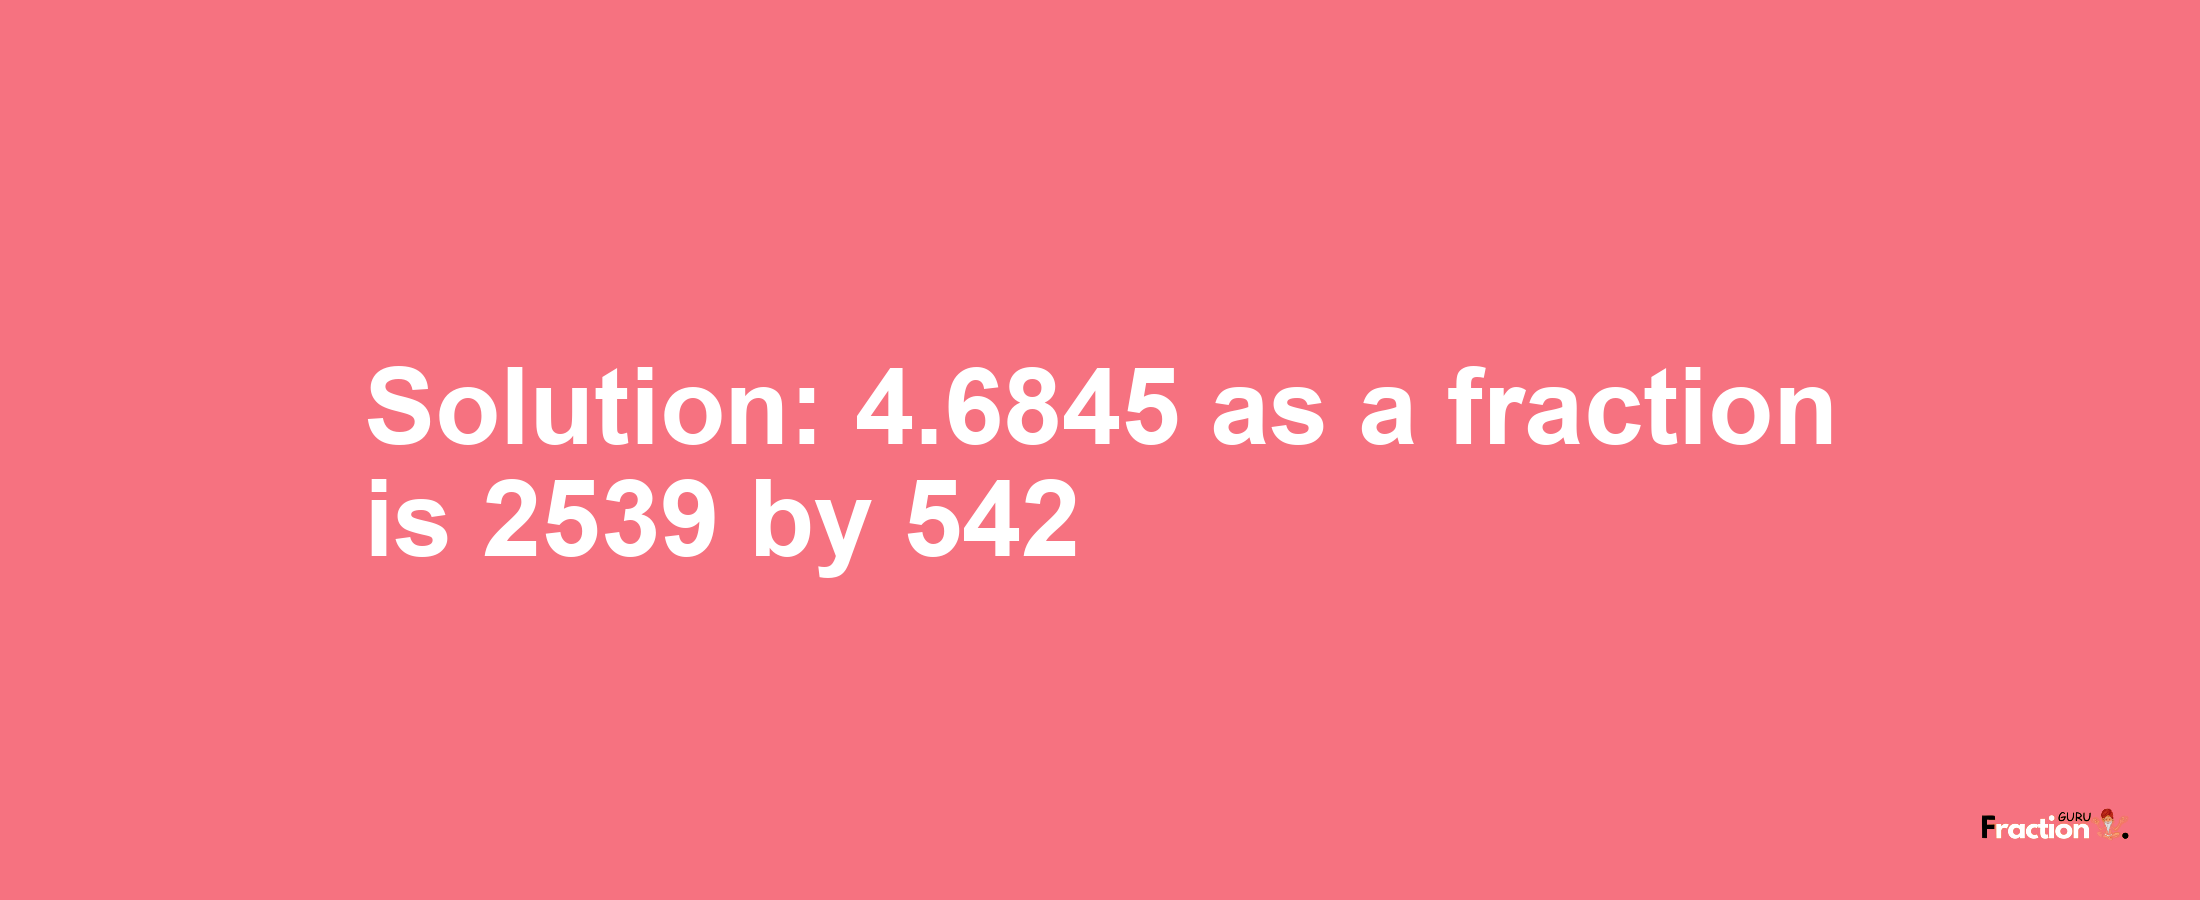 Solution:4.6845 as a fraction is 2539/542